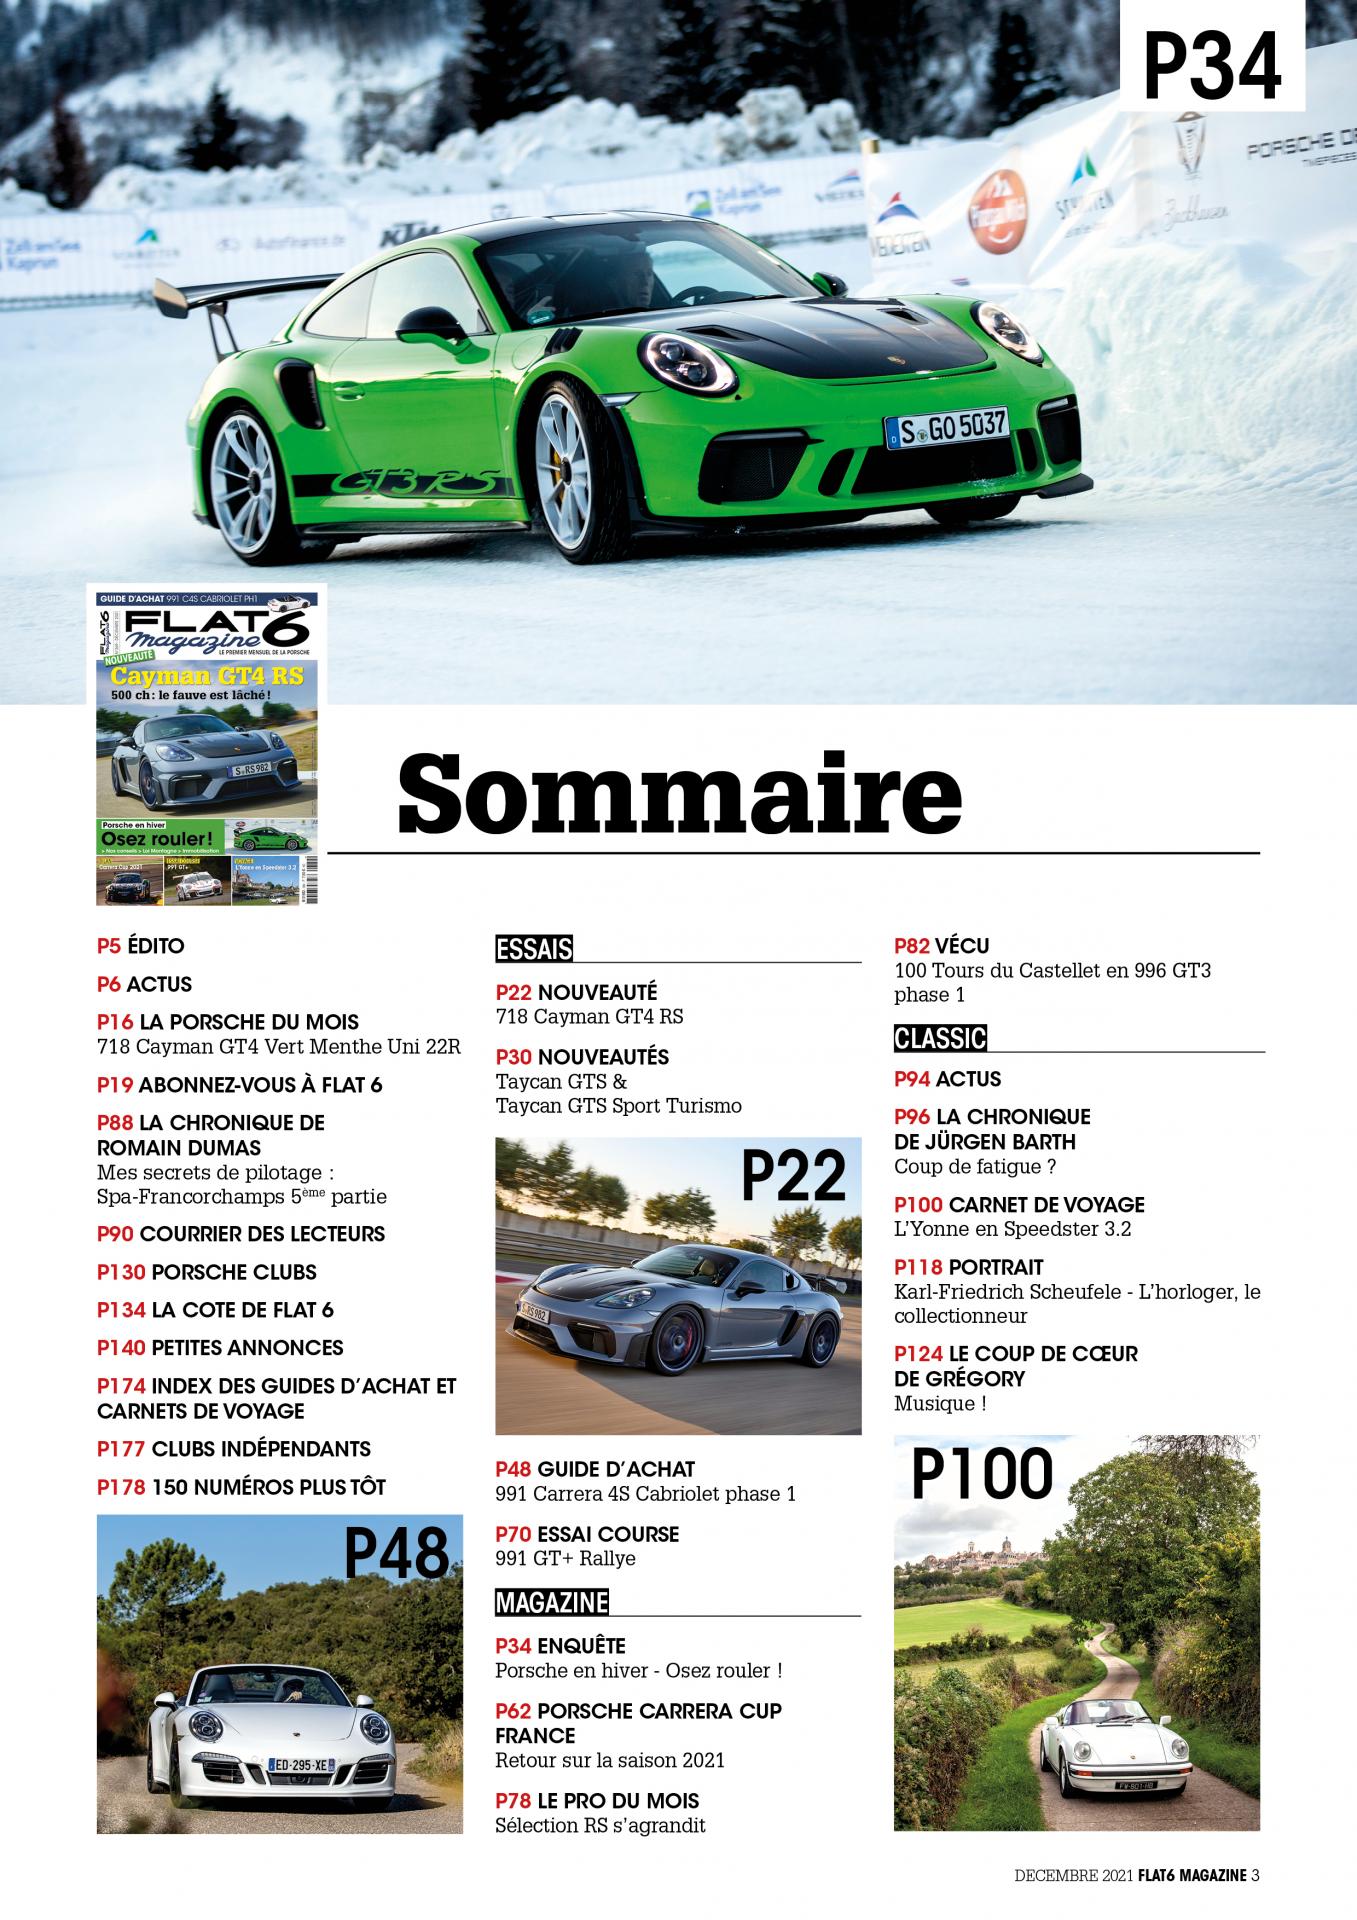 Sommaire369